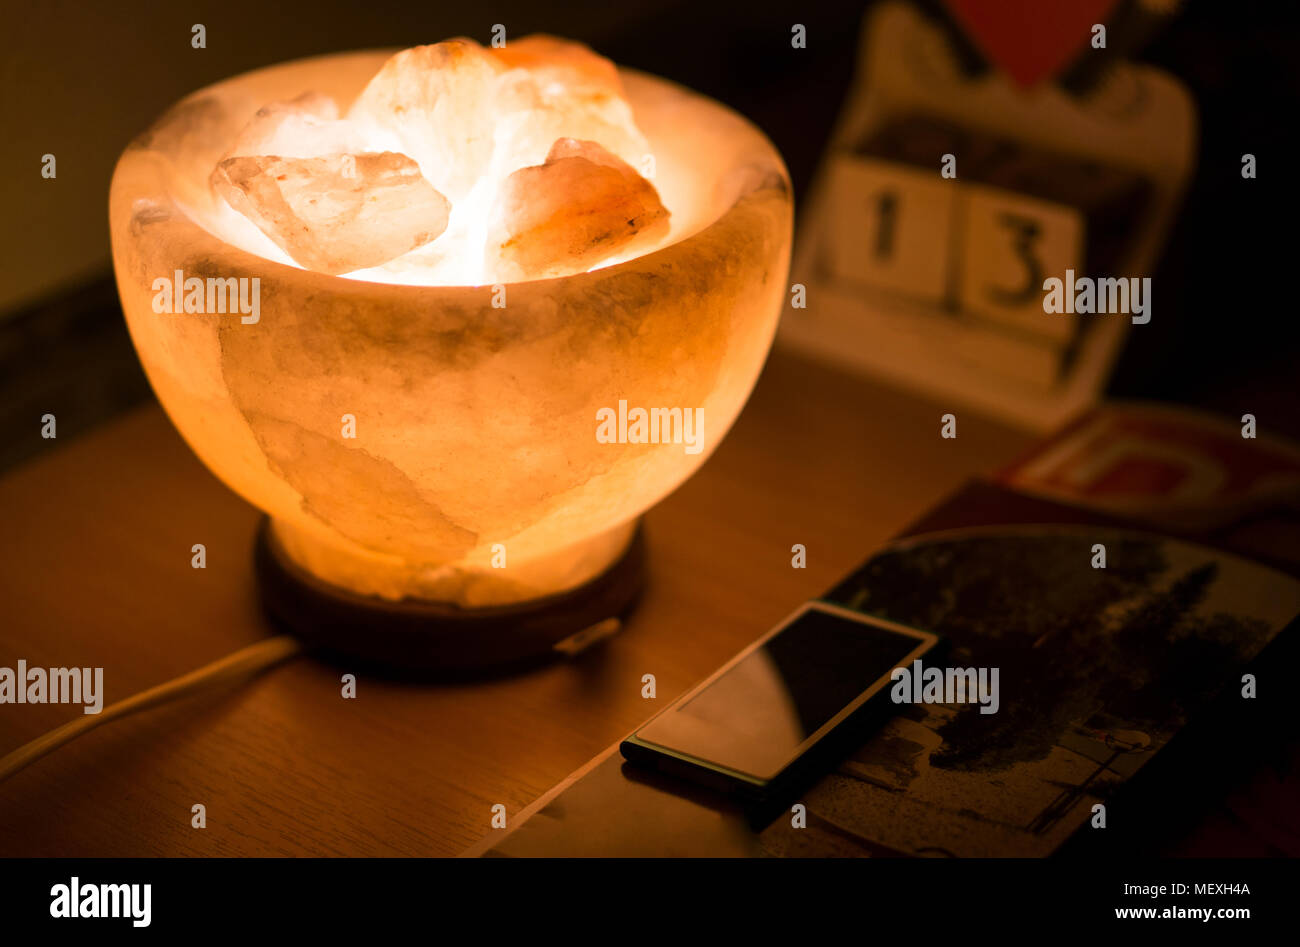 Salt lamp on the wooden table illuminatig the calendar and mp3 player. Shot on friday the 13th Stock Photo